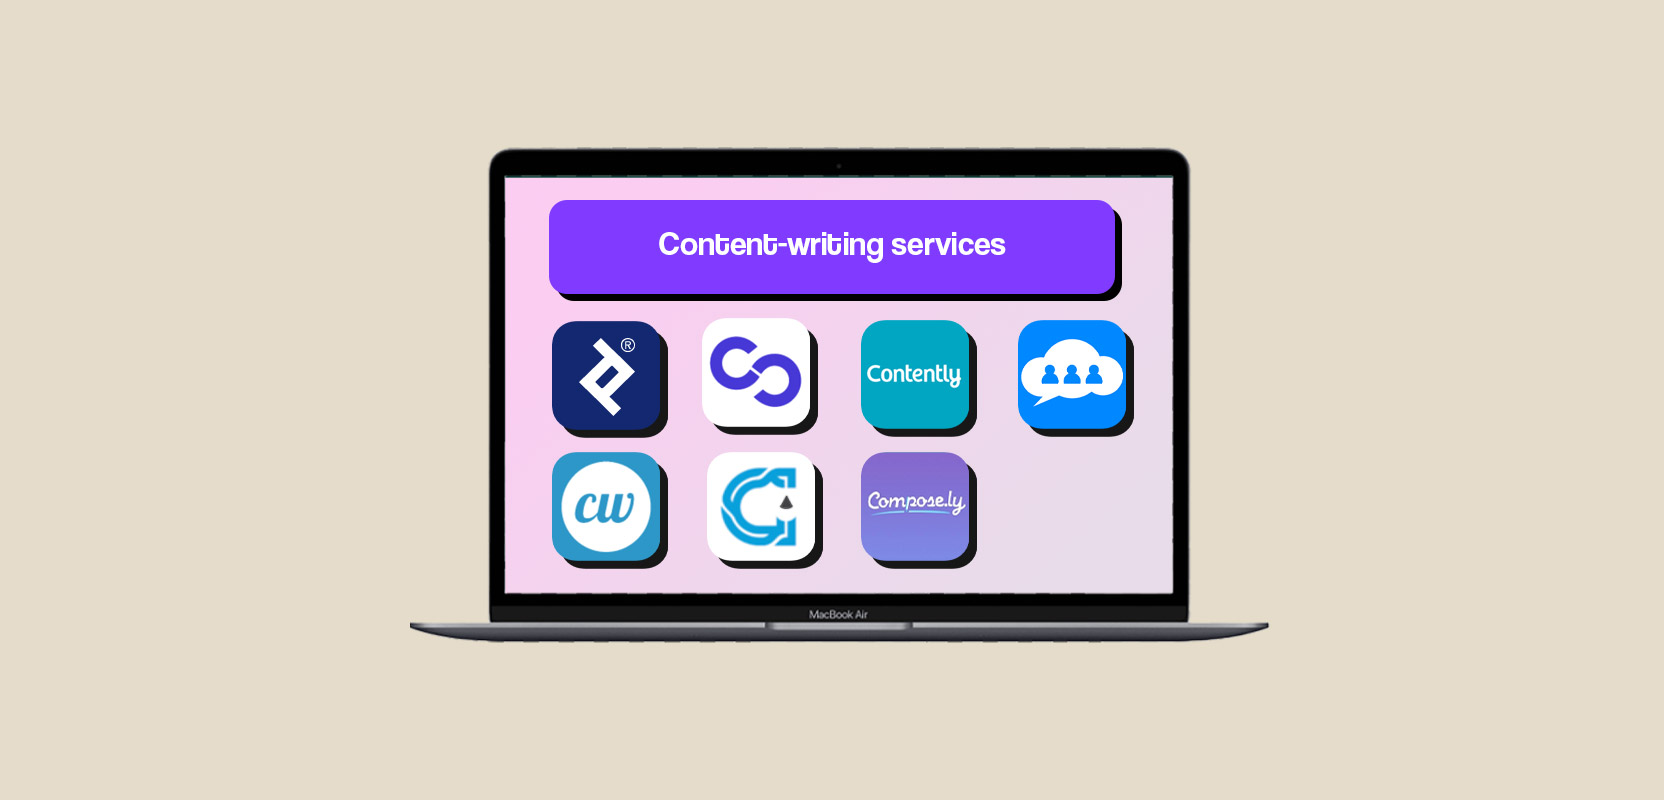 Laptop screen showing several icons of content-writing services